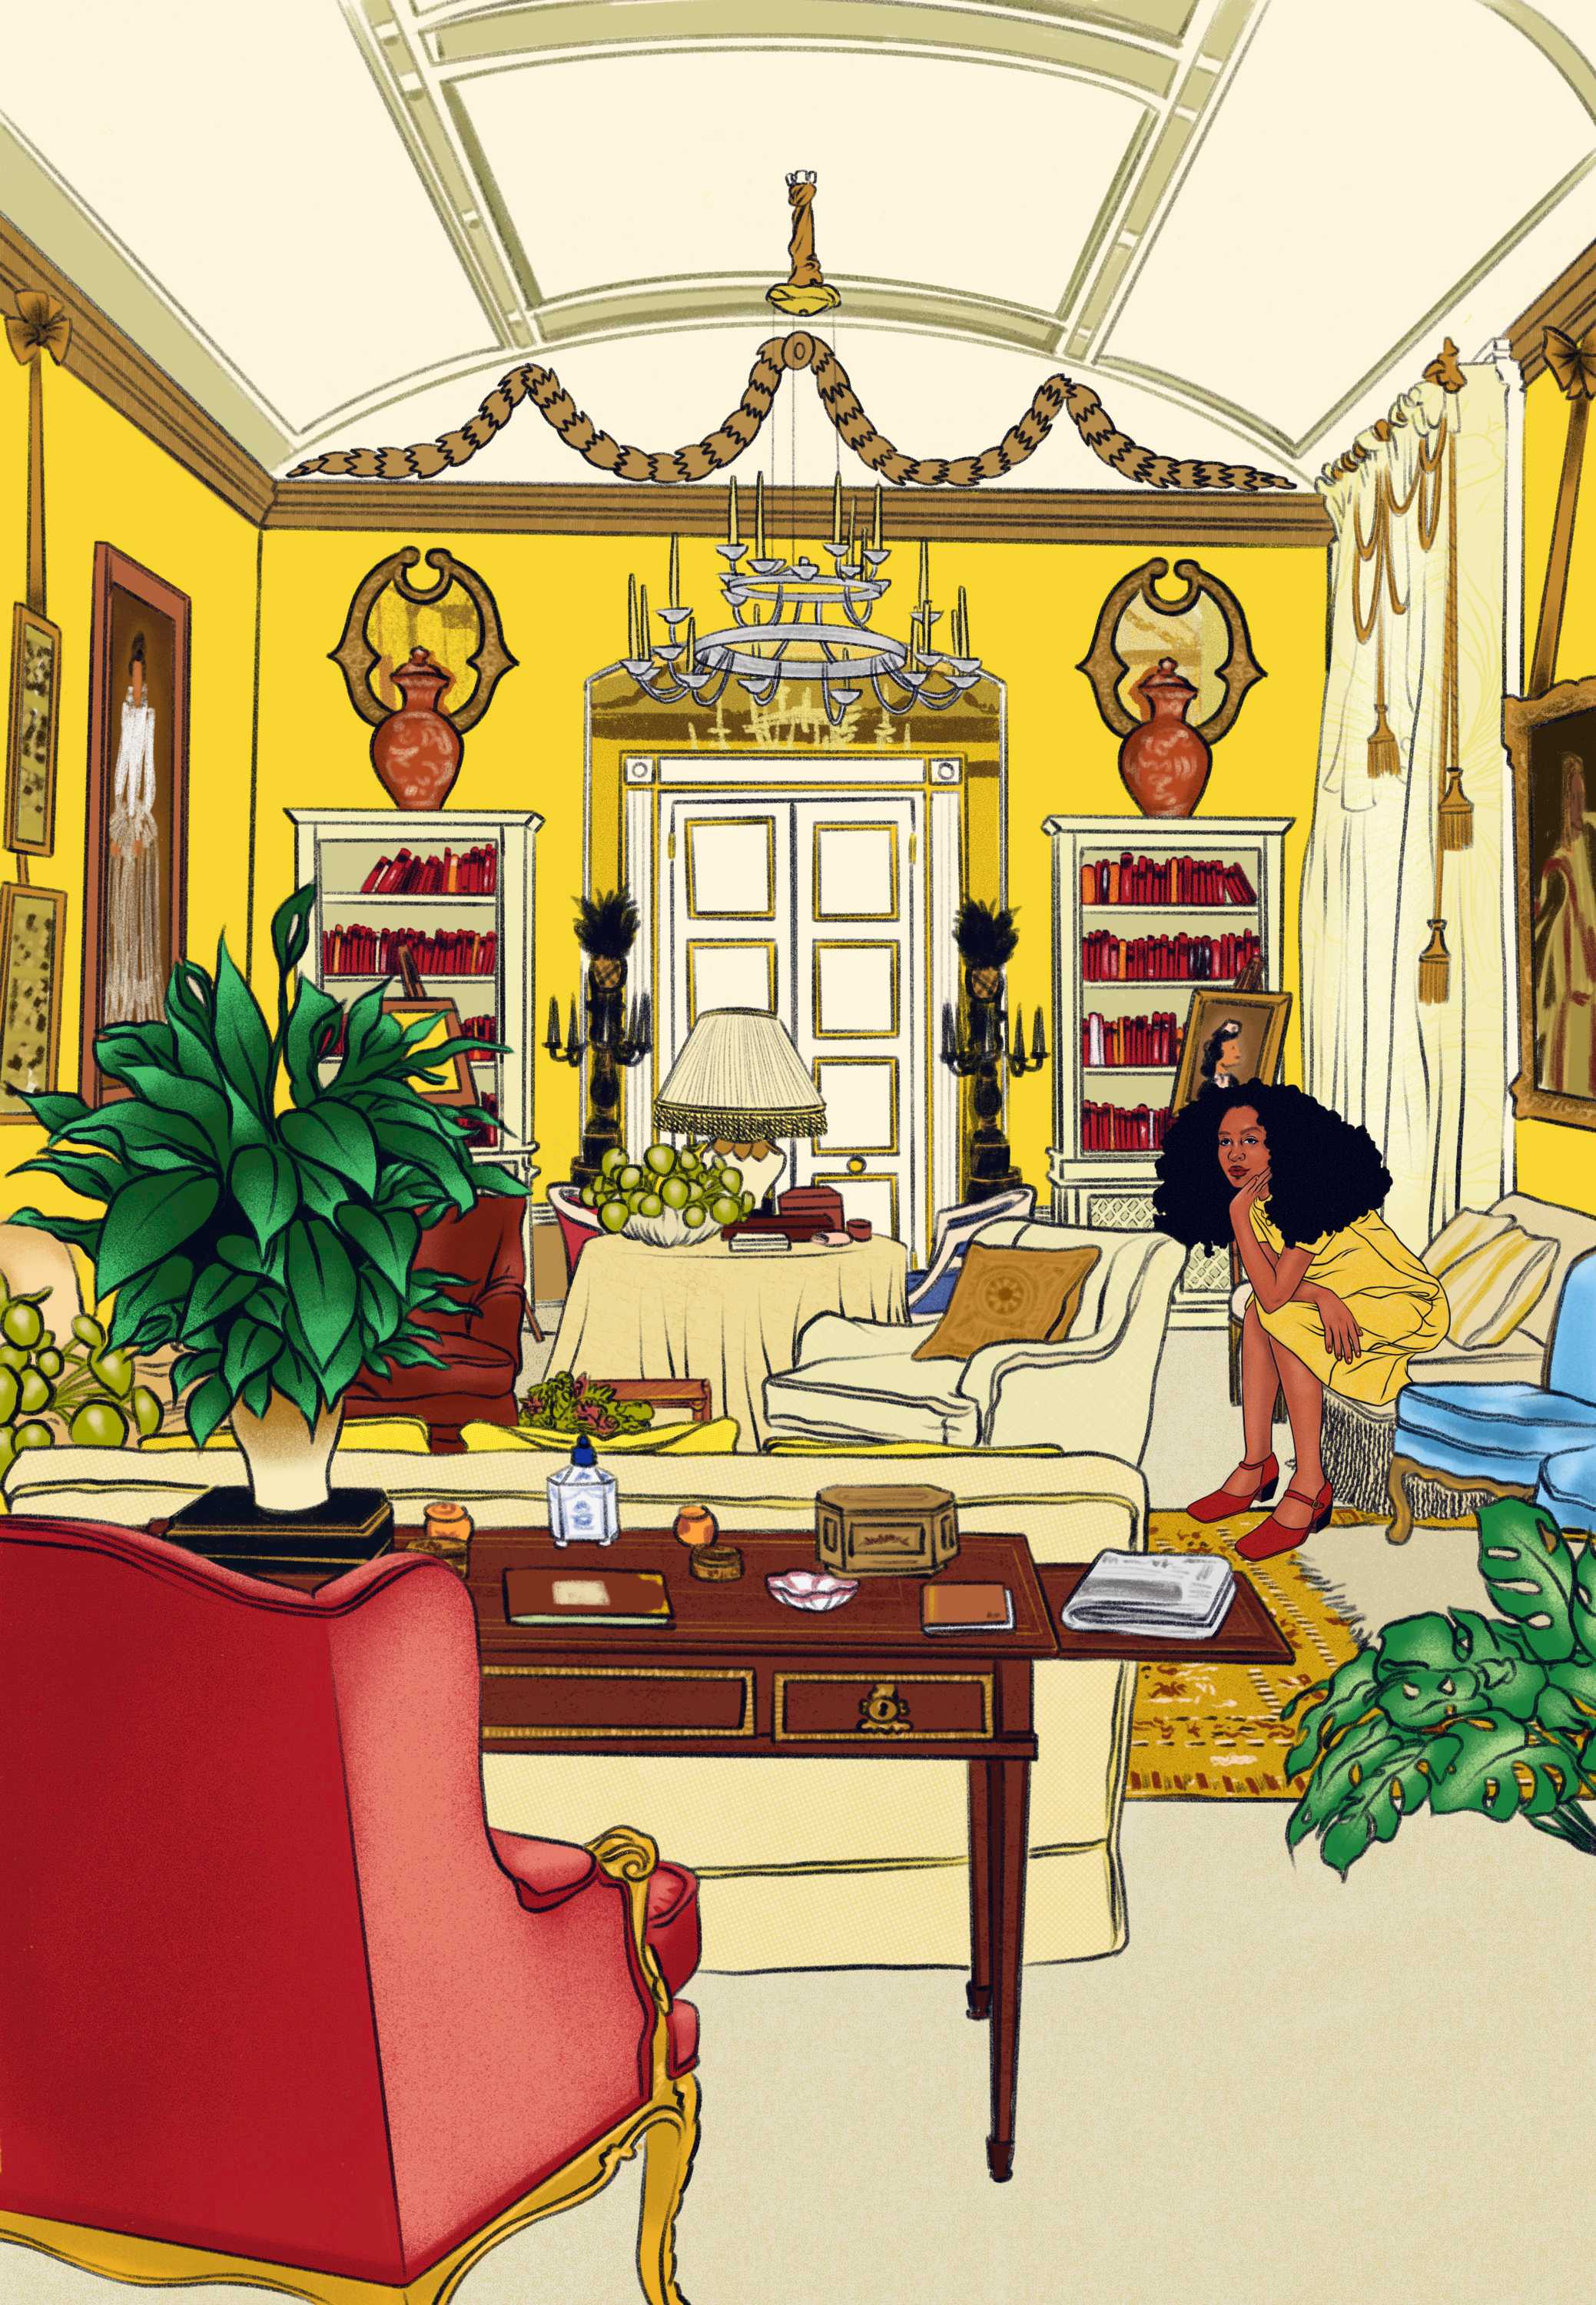 Color illustration of black woman sitting on beige sofa dressed in a yellow dress that matches the bright yellow walls.  The room is elaborately decorated with plants, furniture and art objects.